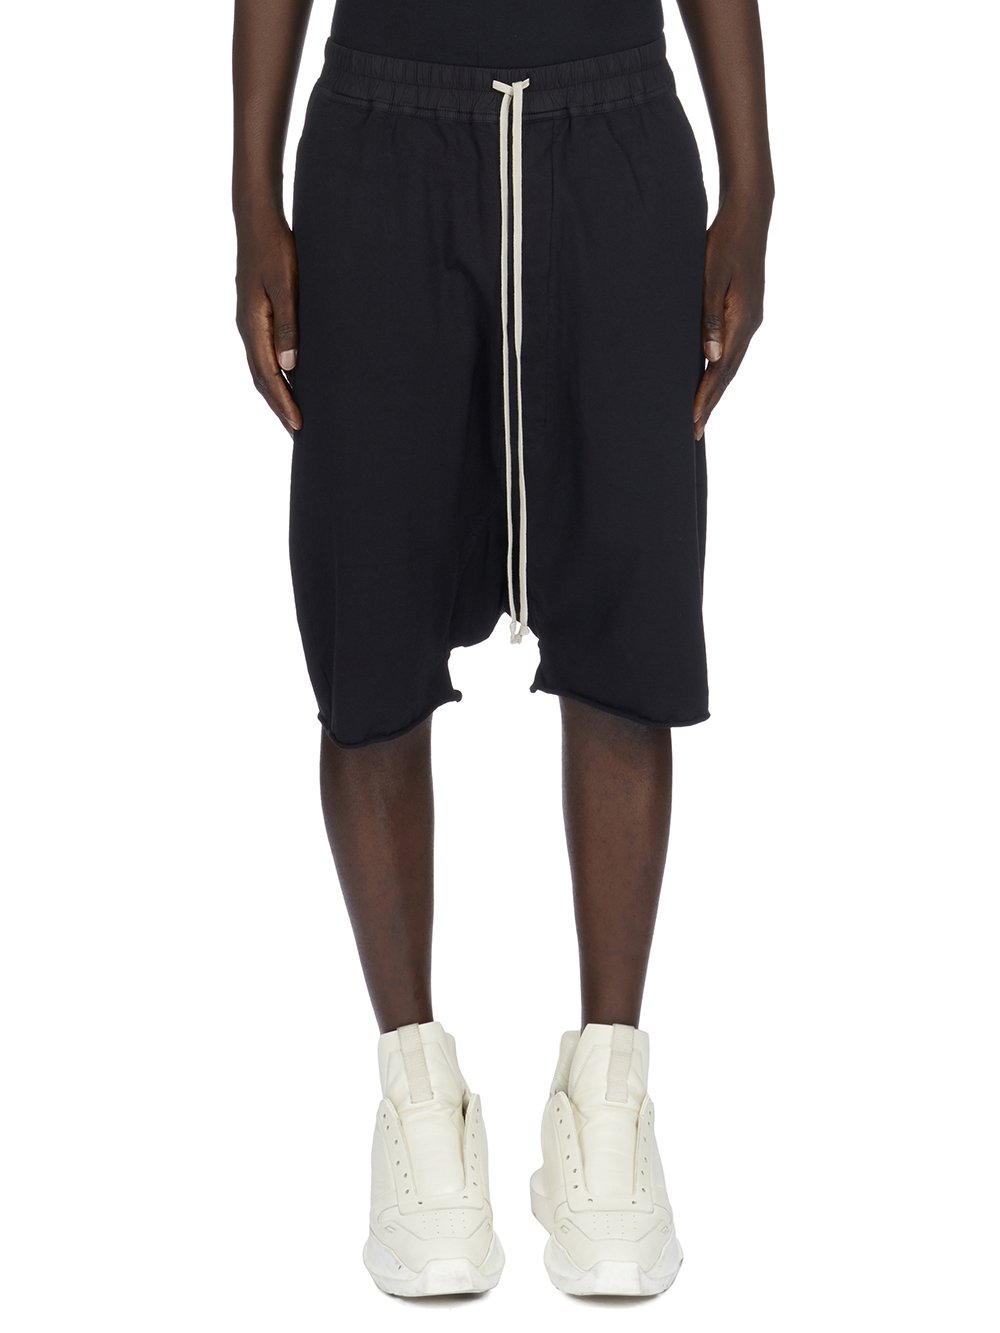 DRKSHDW FW23 LUXOR DRAWSTRING PODS IN HUSTLER BLUE COMPACT HEAVY COTTON JERSEY